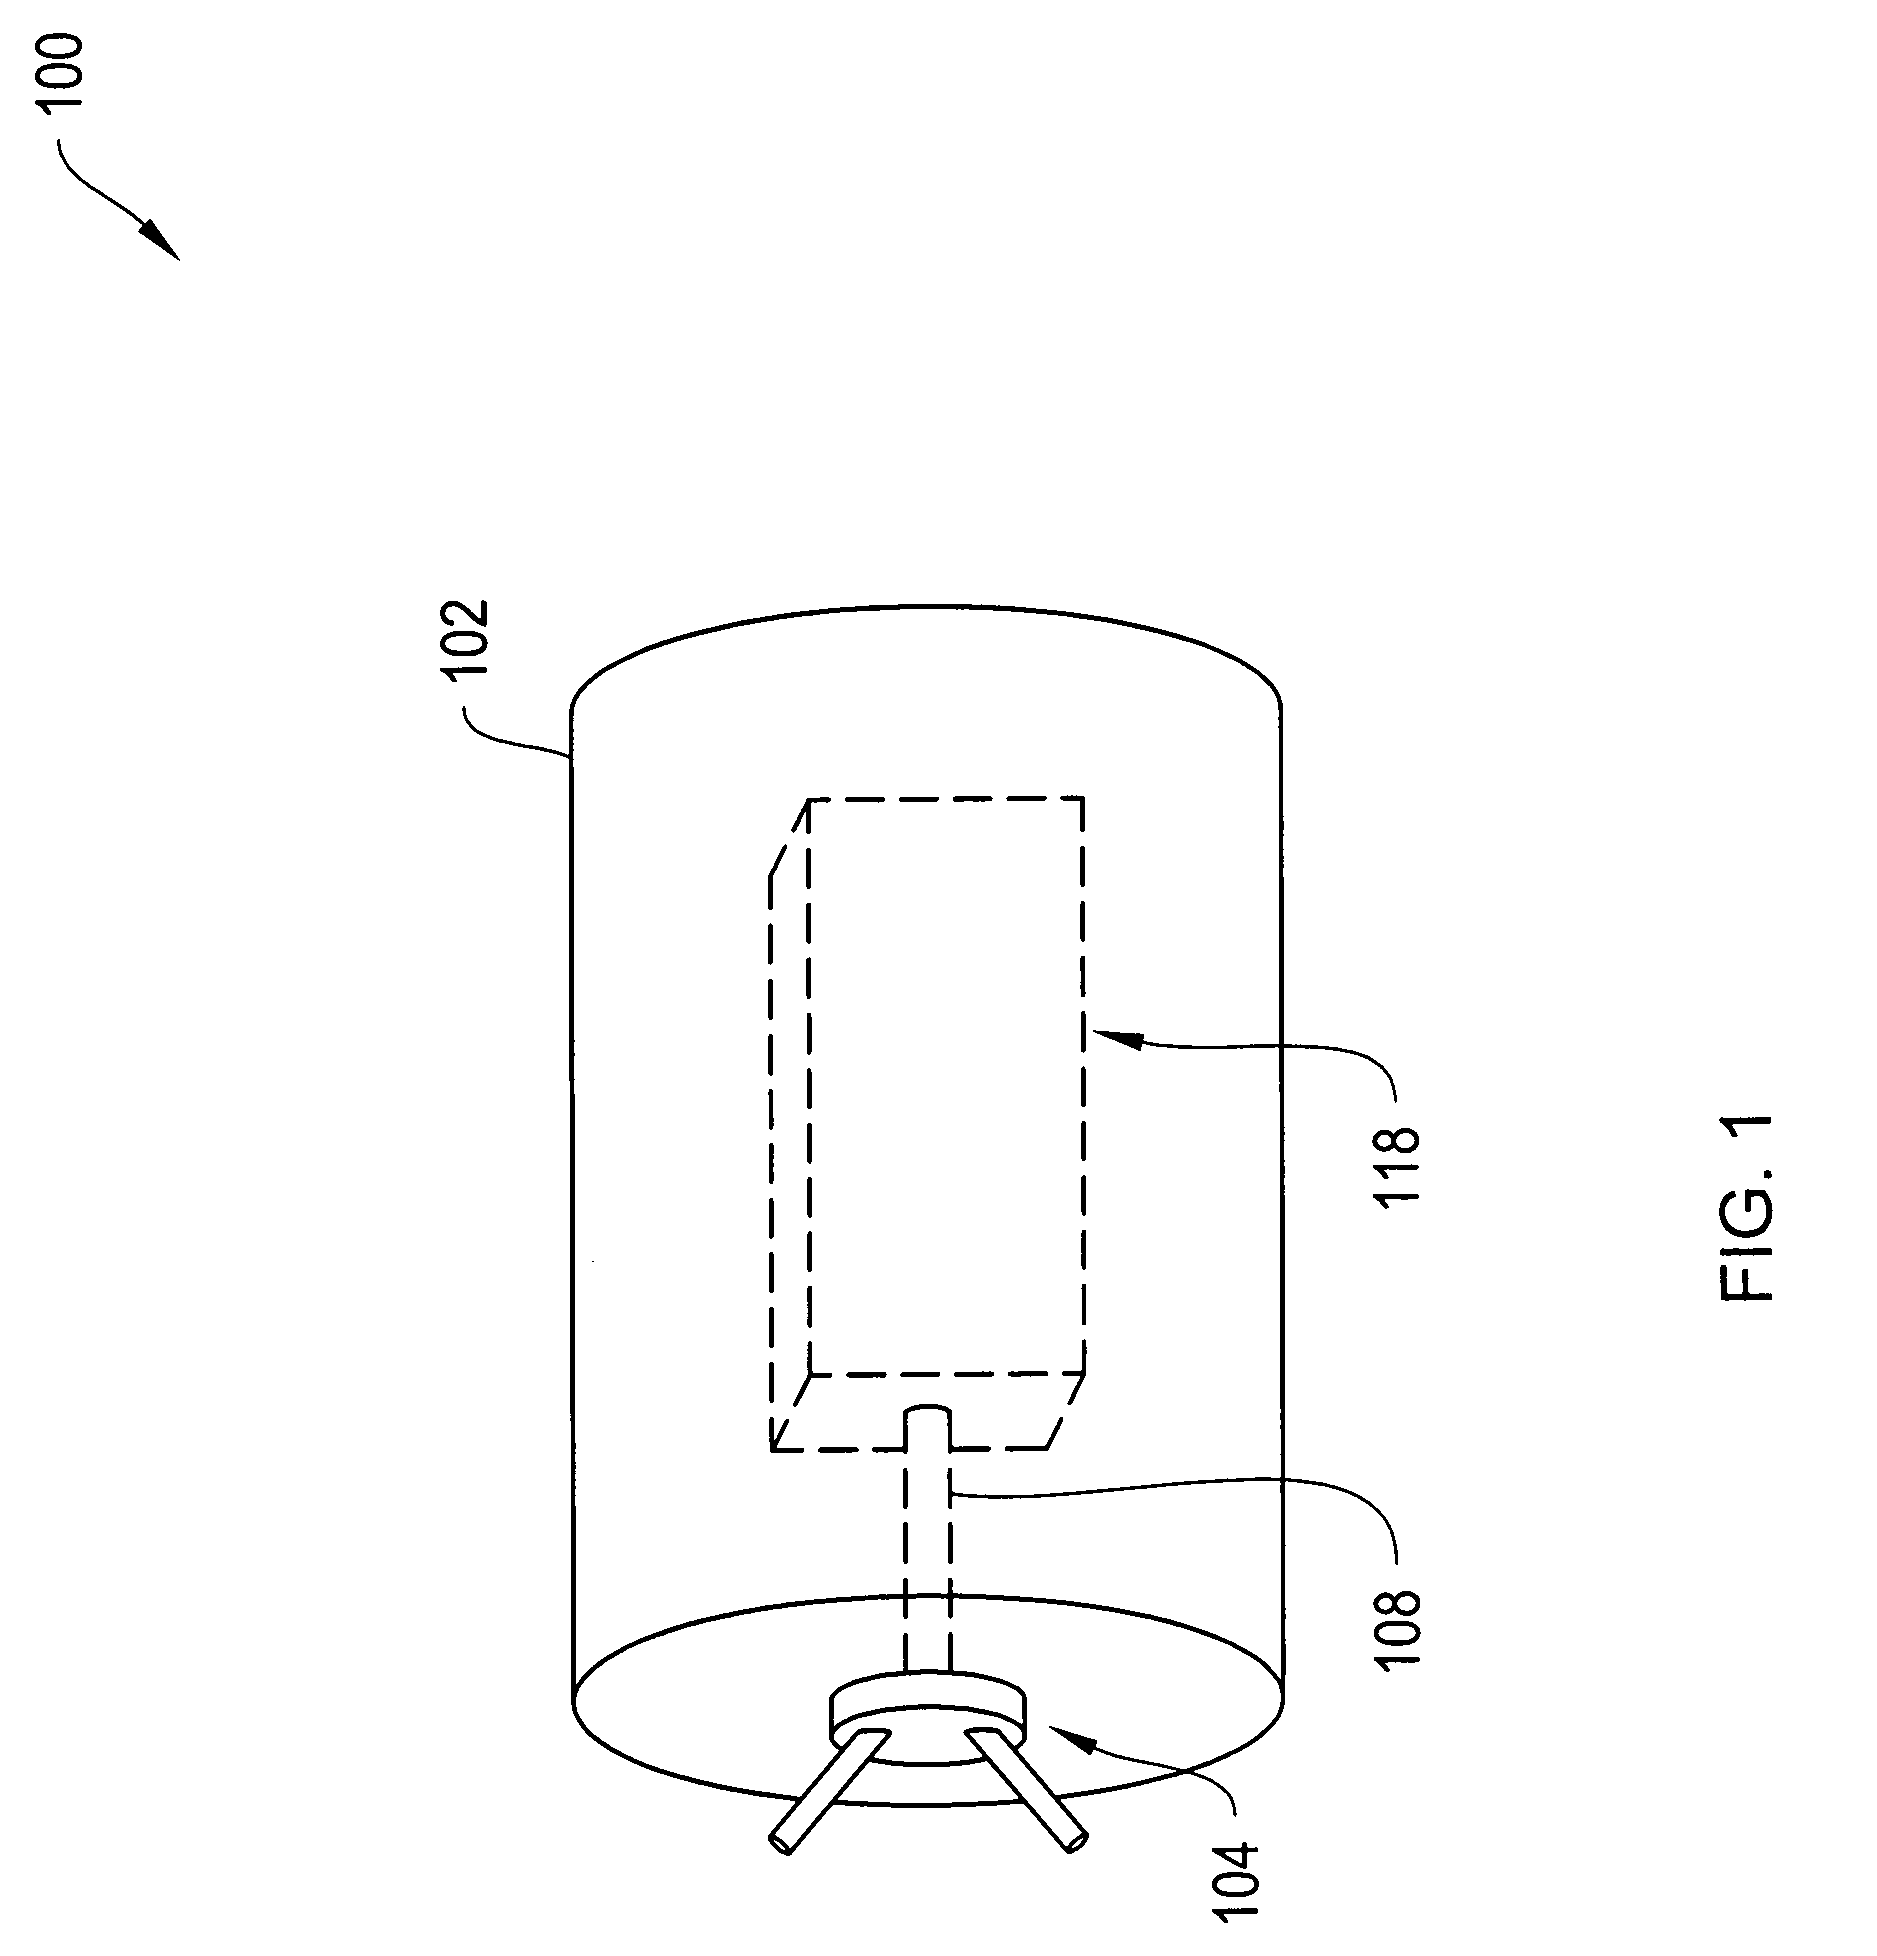 Systems and methods for analyzing underwater, subsurface and atmospheric environments